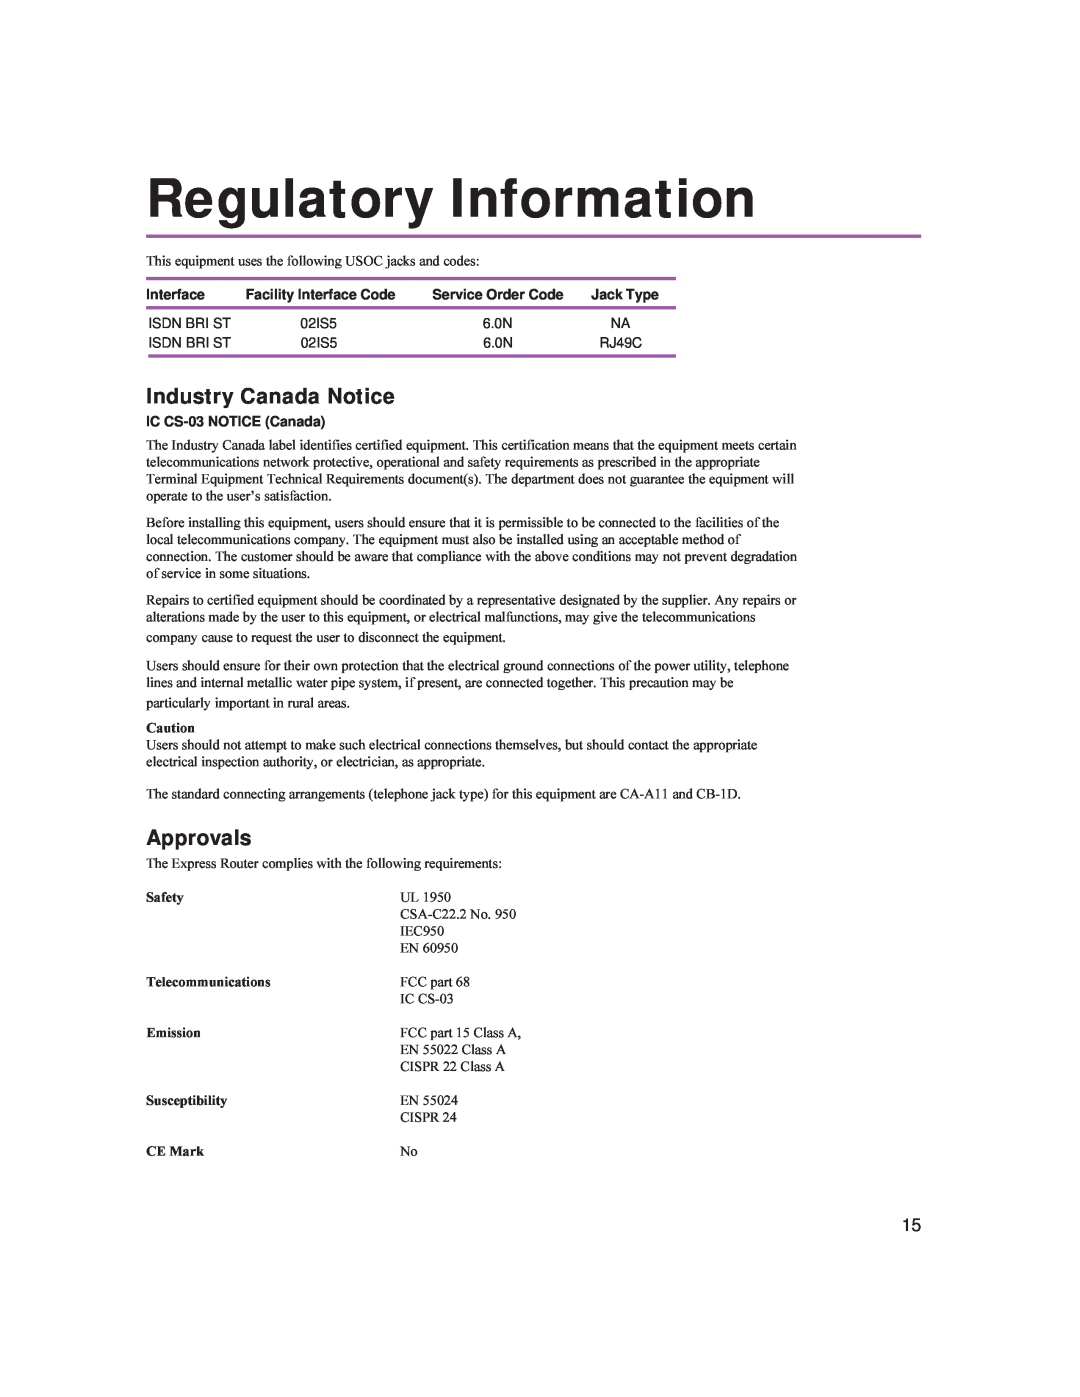 Intel 9545 Regulatory Information, Industry Canada Notice, Approvals, Interface, Jack Type, IC CS-03NOTICE Canada, Safety 